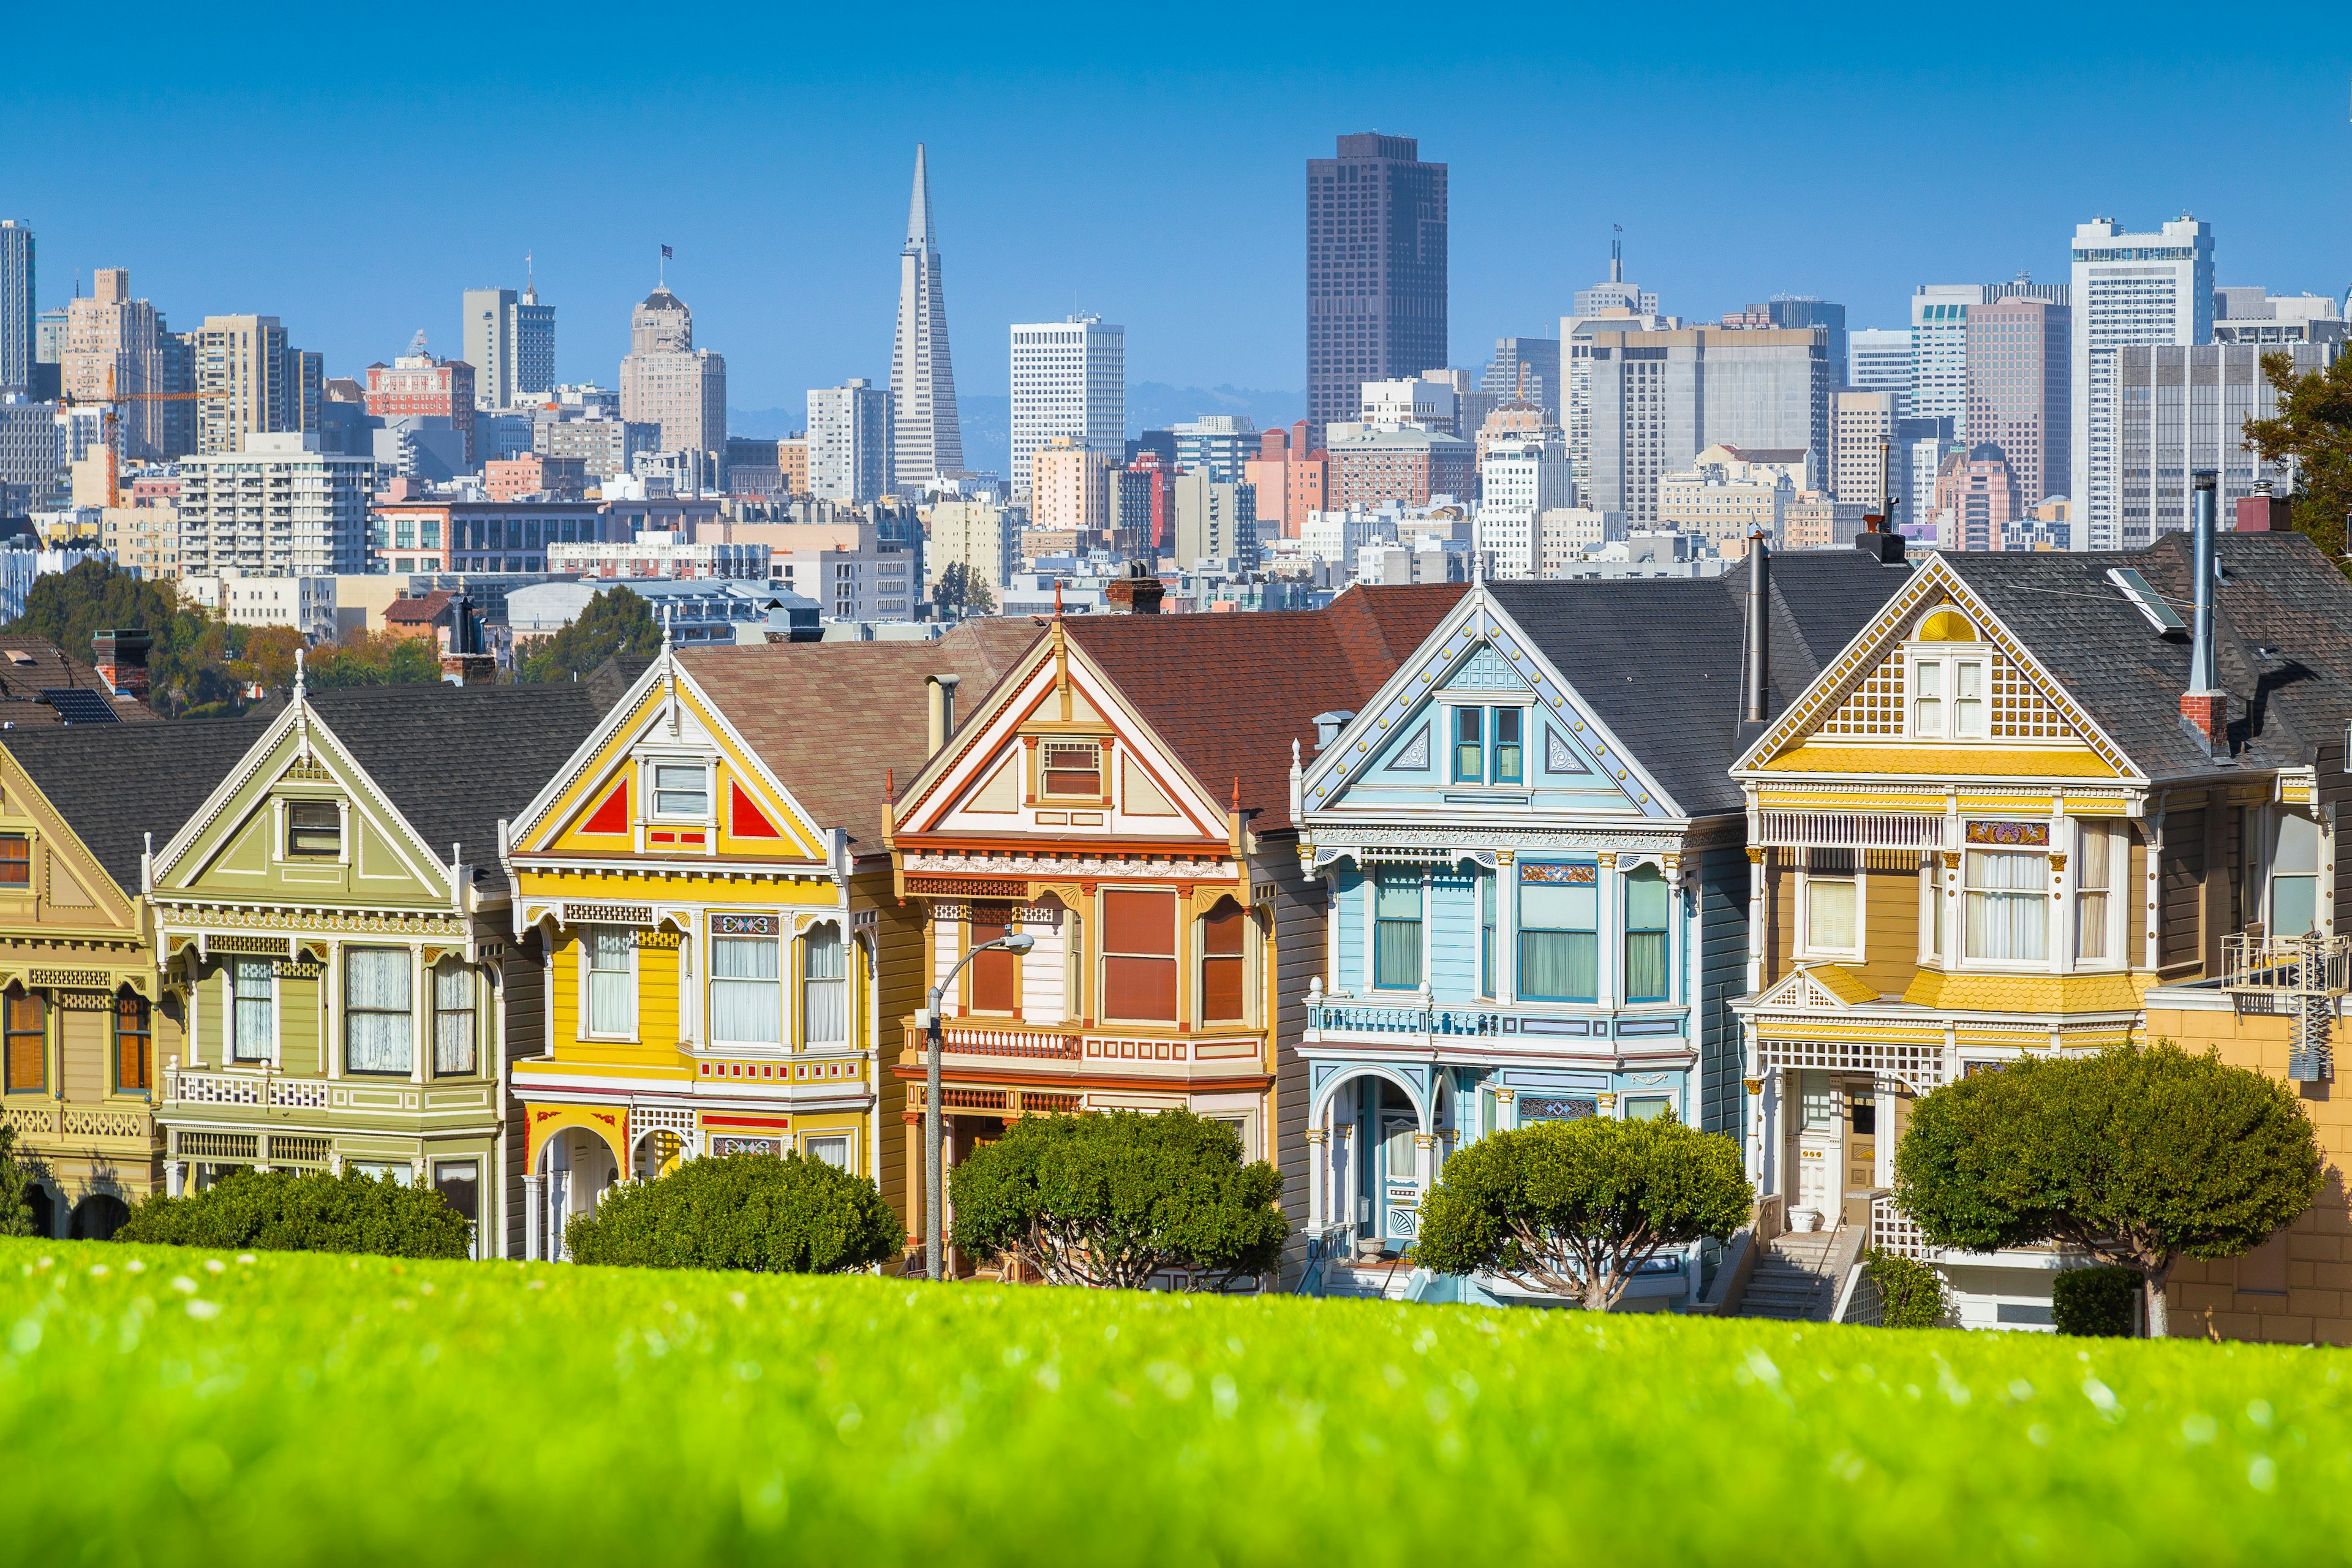 Classic postcard view of famous Painted Ladies, a row of colorful Victorian houses at scenic Alamo Square, with San Francisco skyline in the background on a beautiful sunny day with blue sky in summer